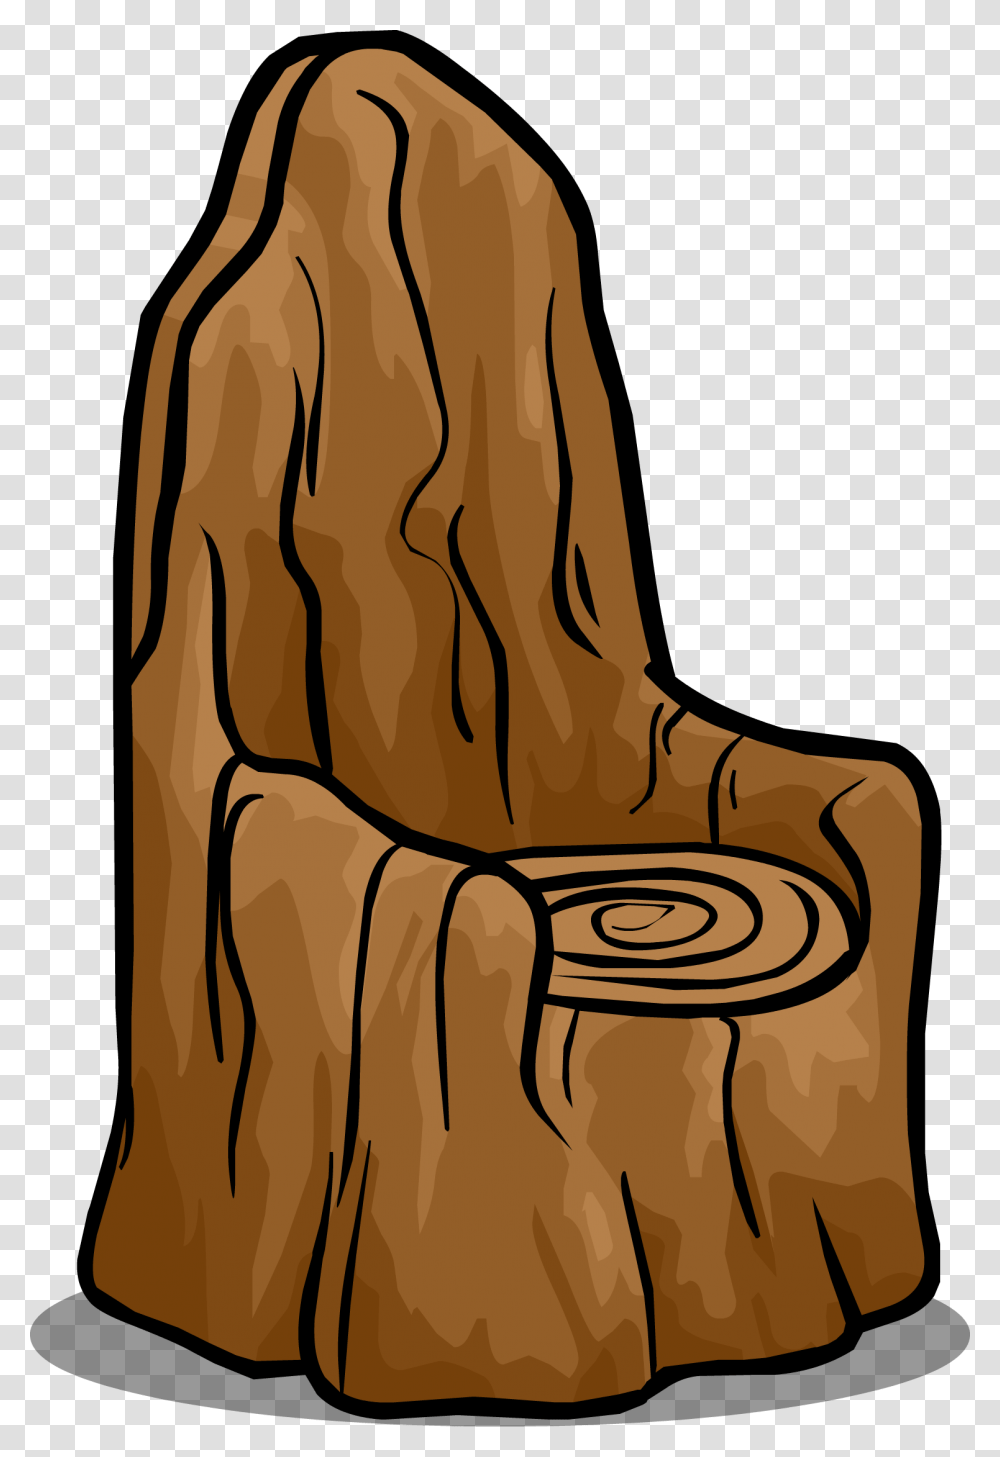 Tree Stump Chair Sprite Tree Chair Clipart, Apparel, Footwear, Cowboy Boot Transparent Png